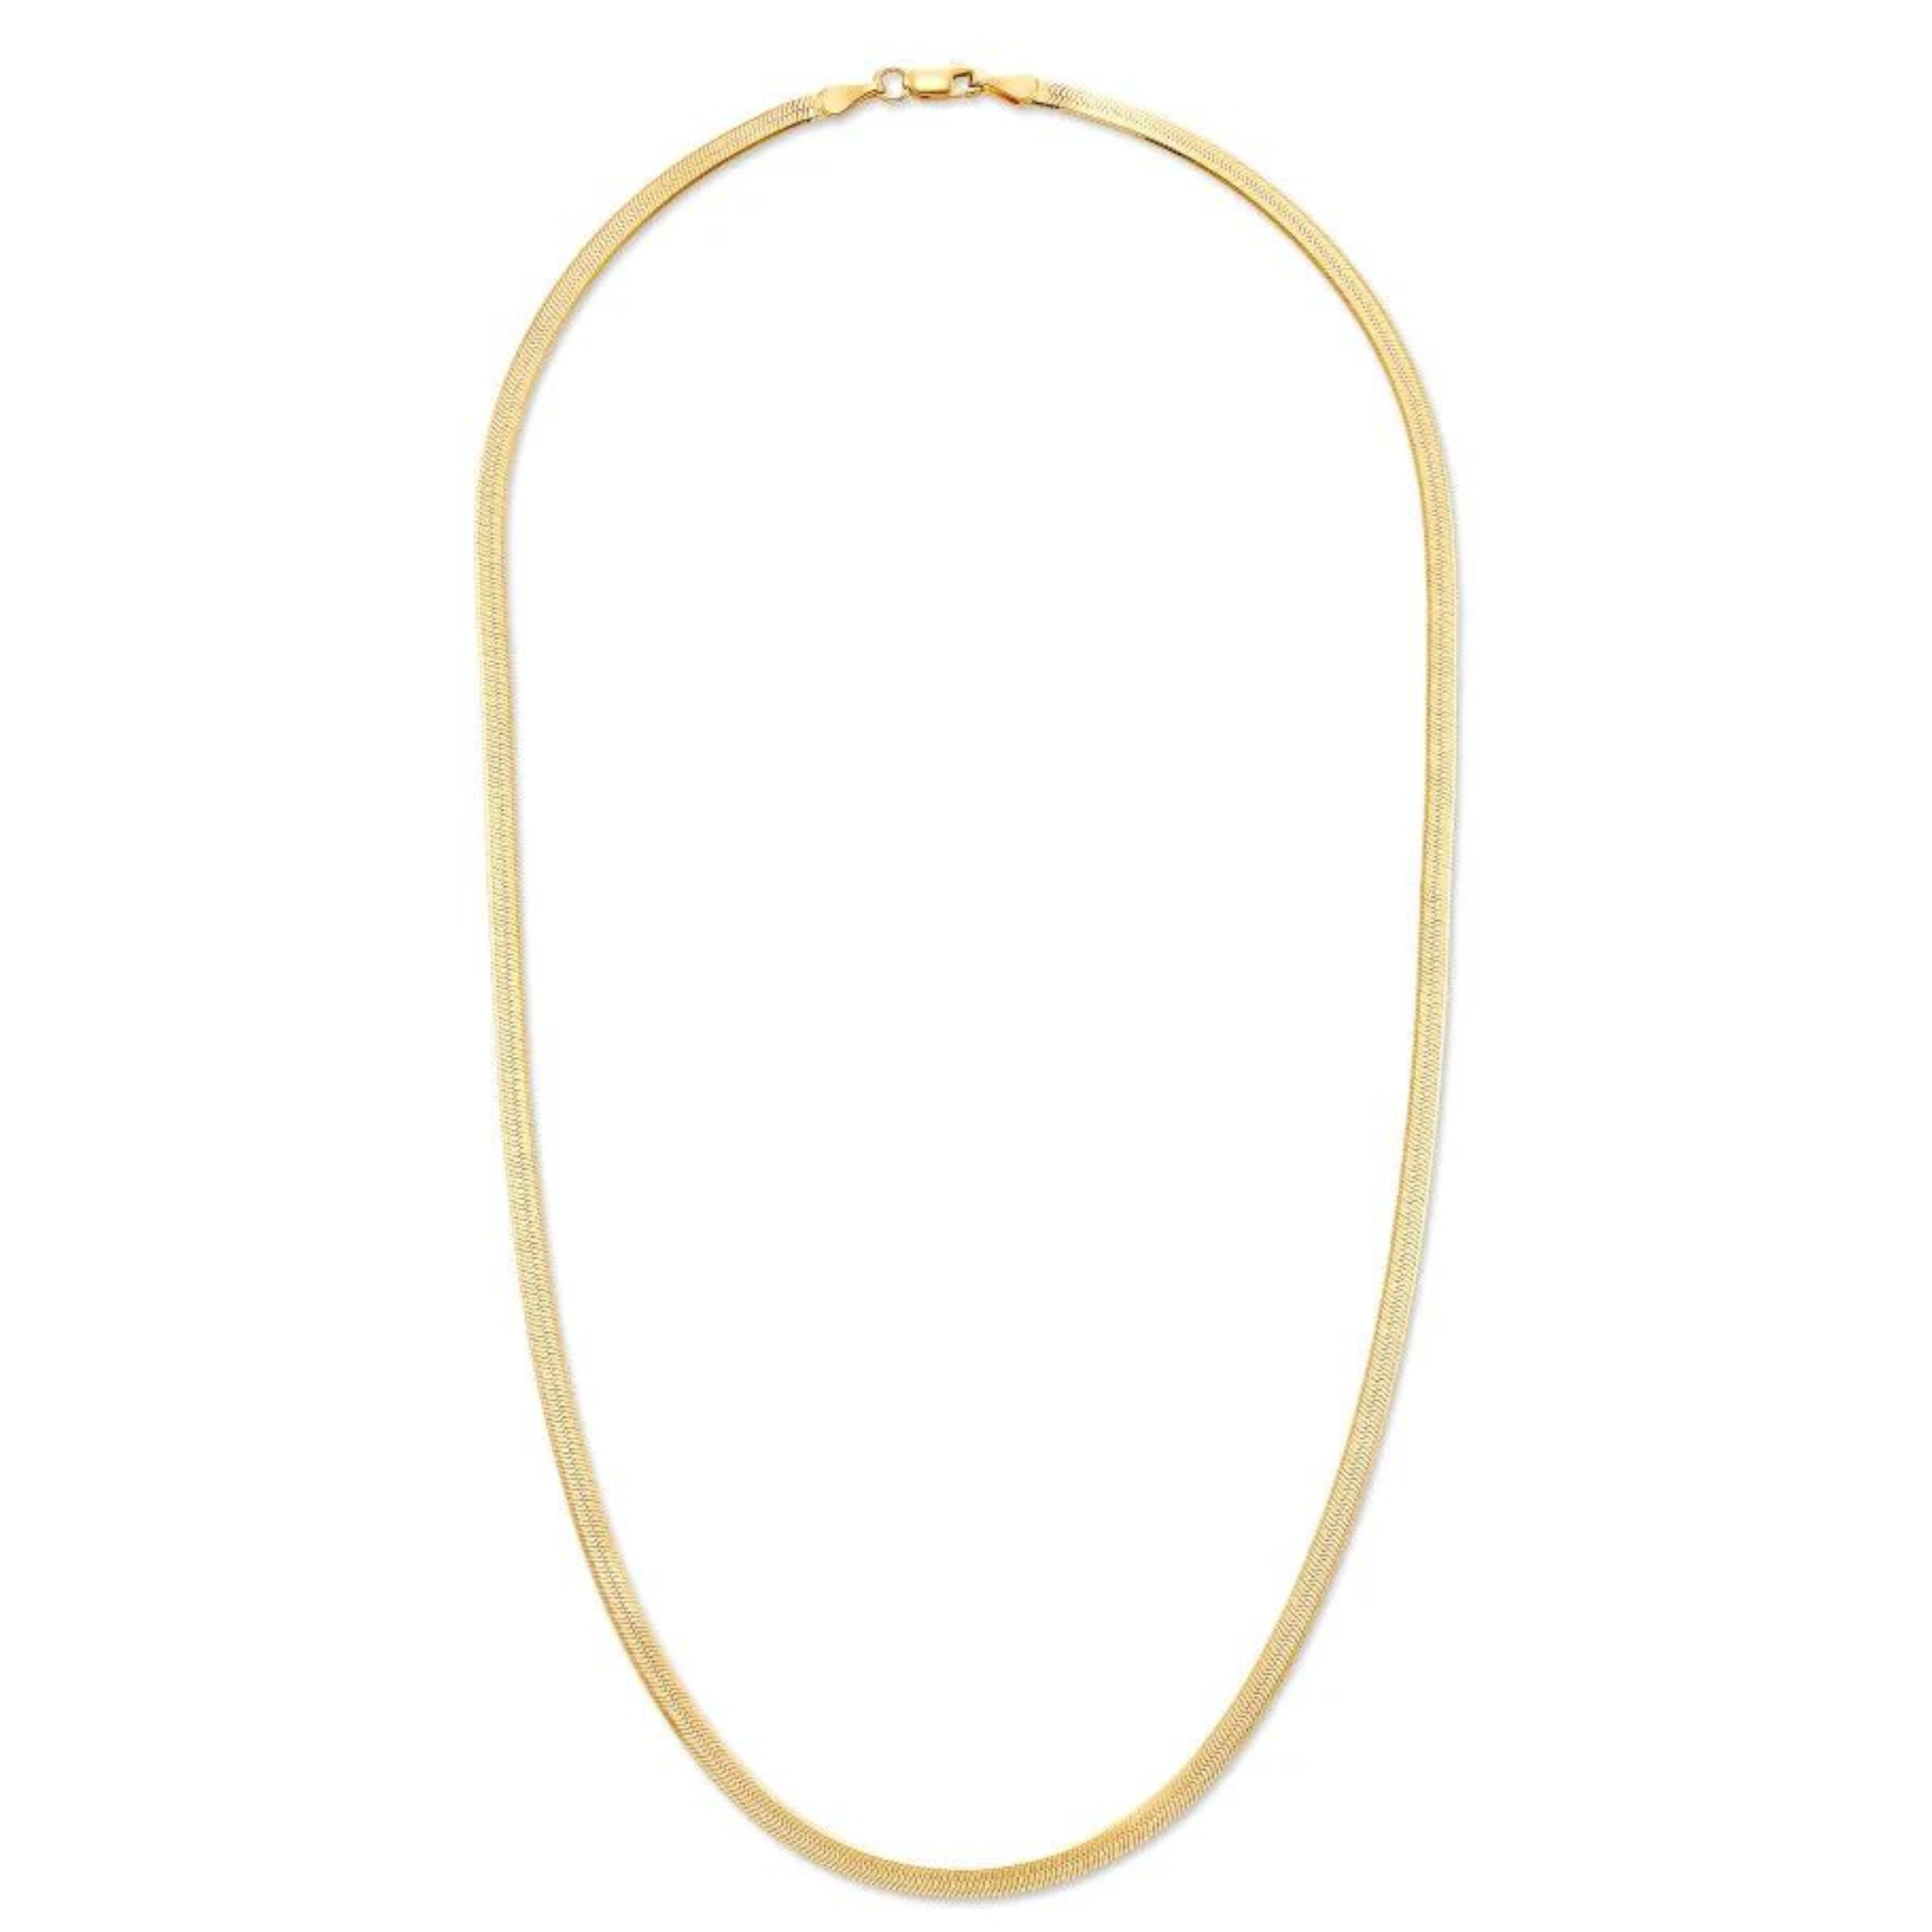 Kendra Scott | Herringbone Chain Necklace in 18k Gold Vermeil - Giddy Up Glamour Boutique